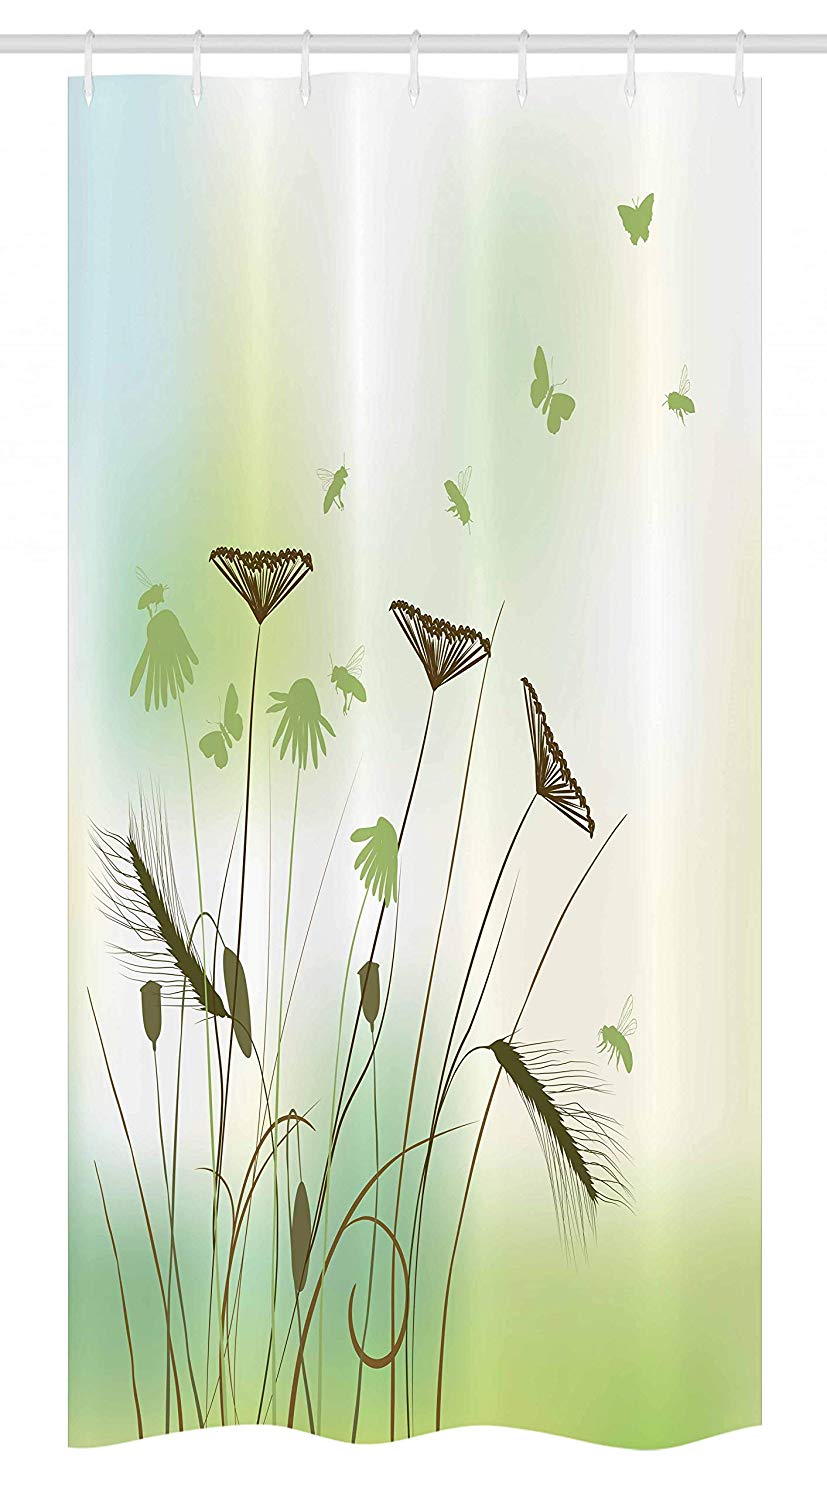 Ambesonne Butterfly Stall Shower Curtain, Silhouette of Dragonflies Bees Butterflies Flying All over the Flowers Spring Theme, Fabric Bathroom Decor Set with Hooks, 36 W x 72 L Inches, Green